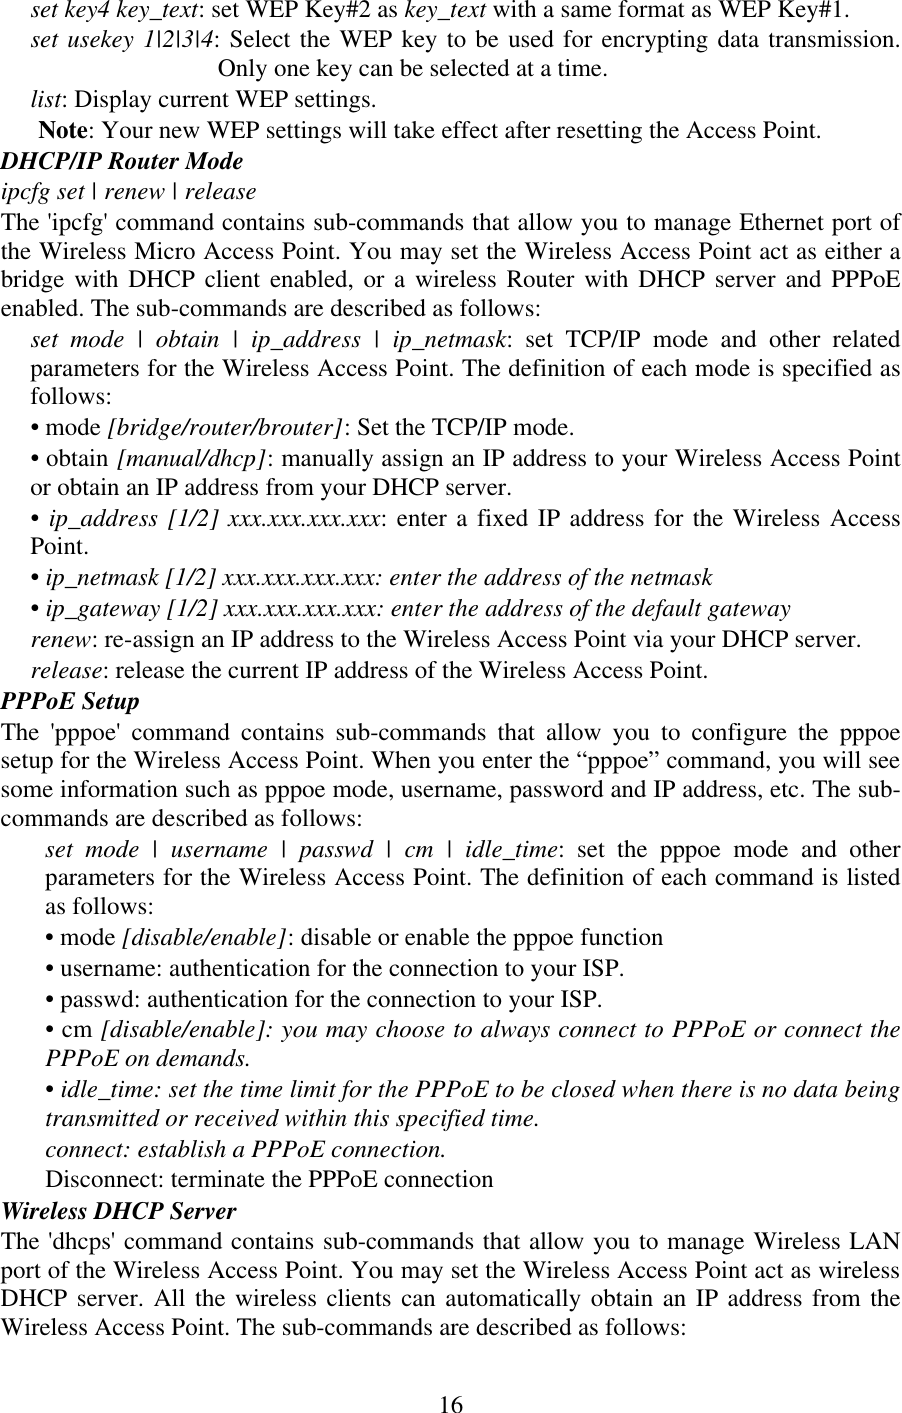   16set key4 key_text: set WEP Key#2 as key_text with a same format as WEP Key#1.  set usekey 1|2|3|4: Select the WEP key to be used for encrypting data transmission. Only one key can be selected at a time.  list: Display current WEP settings.  Note: Your new WEP settings will take effect after resetting the Access Point.  DHCP/IP Router Mode  ipcfg set | renew | release  The &apos;ipcfg&apos; command contains sub-commands that allow you to manage Ethernet port of the Wireless Micro Access Point. You may set the Wireless Access Point act as either a bridge with DHCP client enabled, or a wireless Router with DHCP server and PPPoE enabled. The sub-commands are described as follows:  set mode | obtain | ip_address | ip_netmask: set TCP/IP mode and other related parameters for the Wireless Access Point. The definition of each mode is specified as follows:  • mode [bridge/router/brouter]: Set the TCP/IP mode.  • obtain [manual/dhcp]: manually assign an IP address to your Wireless Access Point or obtain an IP address from your DHCP server.  • ip_address [1/2] xxx.xxx.xxx.xxx: enter a fixed IP address for the Wireless Access Point.  • ip_netmask [1/2] xxx.xxx.xxx.xxx: enter the address of the netmask  • ip_gateway [1/2] xxx.xxx.xxx.xxx: enter the address of the default gateway  renew: re-assign an IP address to the Wireless Access Point via your DHCP server.  release: release the current IP address of the Wireless Access Point.  PPPoE Setup  The &apos;pppoe&apos; command contains sub-commands that allow you to configure the pppoe setup for the Wireless Access Point. When you enter the “pppoe” command, you will see some information such as pppoe mode, username, password and IP address, etc. The sub-commands are described as follows:  set mode | username | passwd | cm | idle_time: set the pppoe mode and other parameters for the Wireless Access Point. The definition of each command is listed as follows:  • mode [disable/enable]: disable or enable the pppoe function  • username: authentication for the connection to your ISP.  • passwd: authentication for the connection to your ISP.  • cm [disable/enable]: you may choose to always connect to PPPoE or connect the PPPoE on demands.  • idle_time: set the time limit for the PPPoE to be closed when there is no data being transmitted or received within this specified time.  connect: establish a PPPoE connection.  Disconnect: terminate the PPPoE connection  Wireless DHCP Server  The &apos;dhcps&apos; command contains sub-commands that allow you to manage Wireless LAN port of the Wireless Access Point. You may set the Wireless Access Point act as wireless DHCP server. All the wireless clients can automatically obtain an IP address from the Wireless Access Point. The sub-commands are described as follows:  